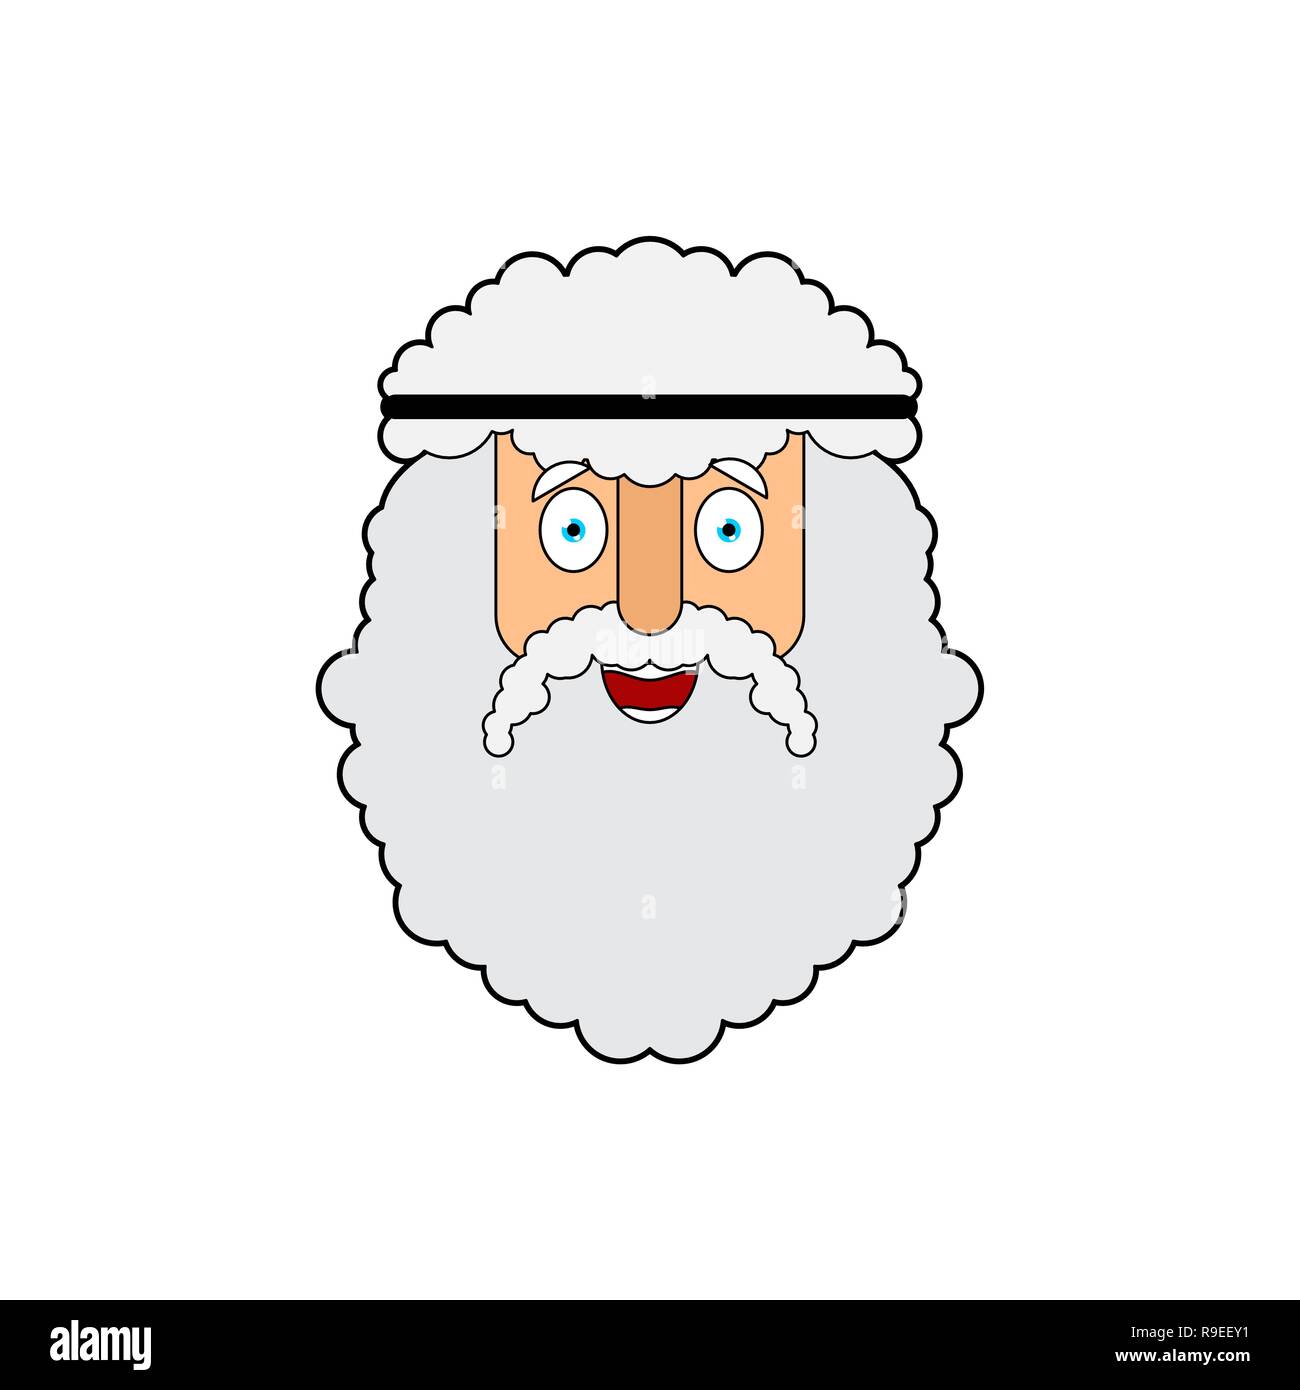 Archimedes face. Ancient greek mathematician, physicist. vector illustration Stock Vector